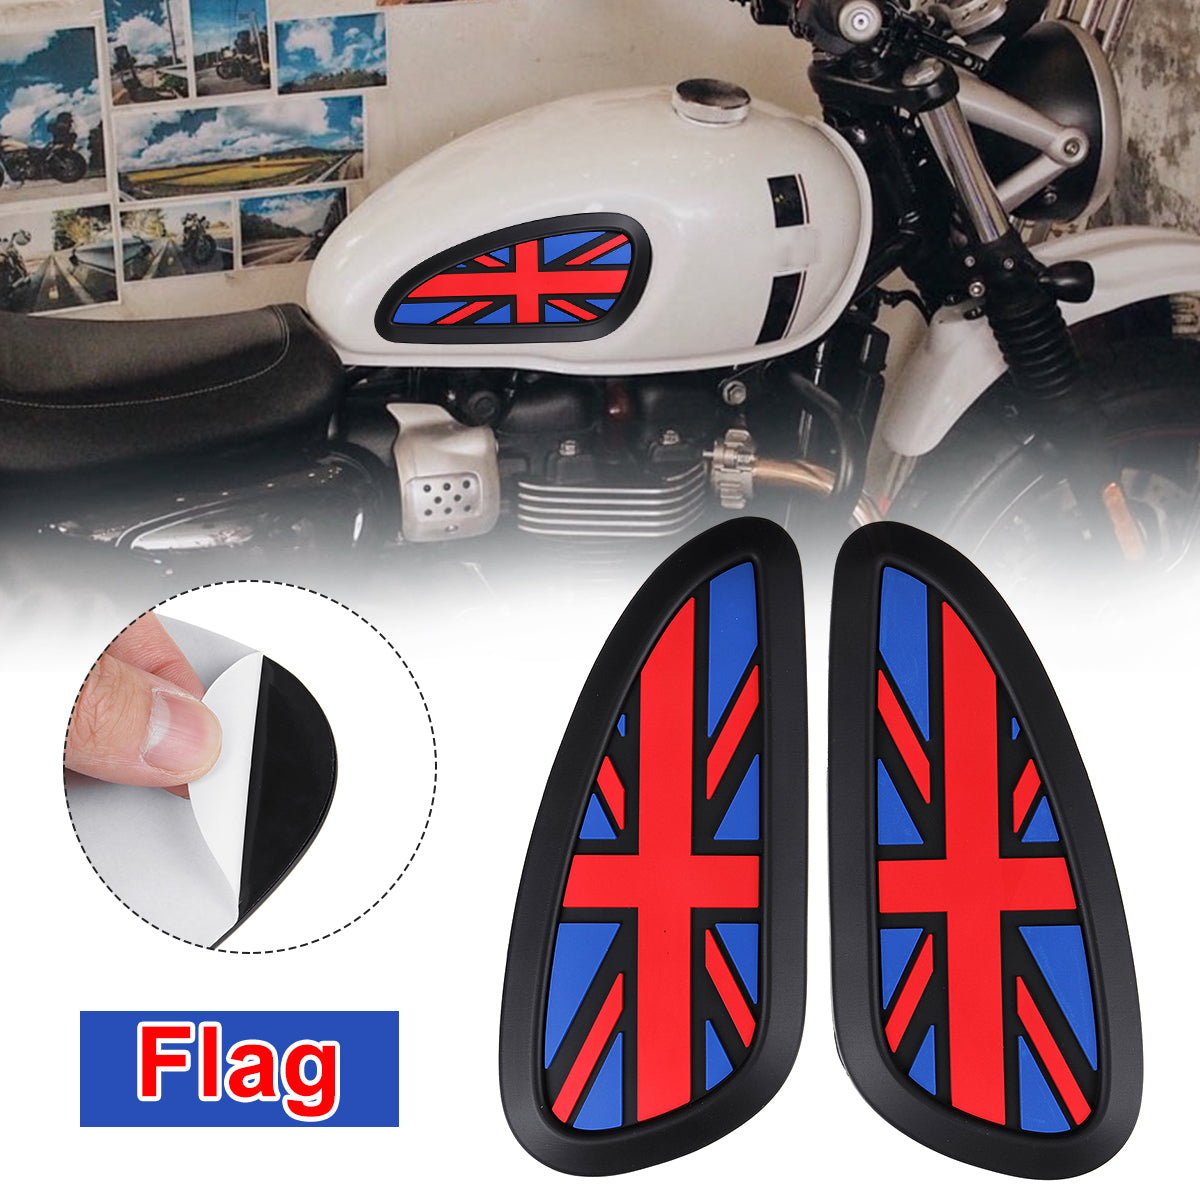 Orange Red Retro Motorcycle Cafe Racer Gas Fuel tank Rubber Sticker Tank Pad Protector